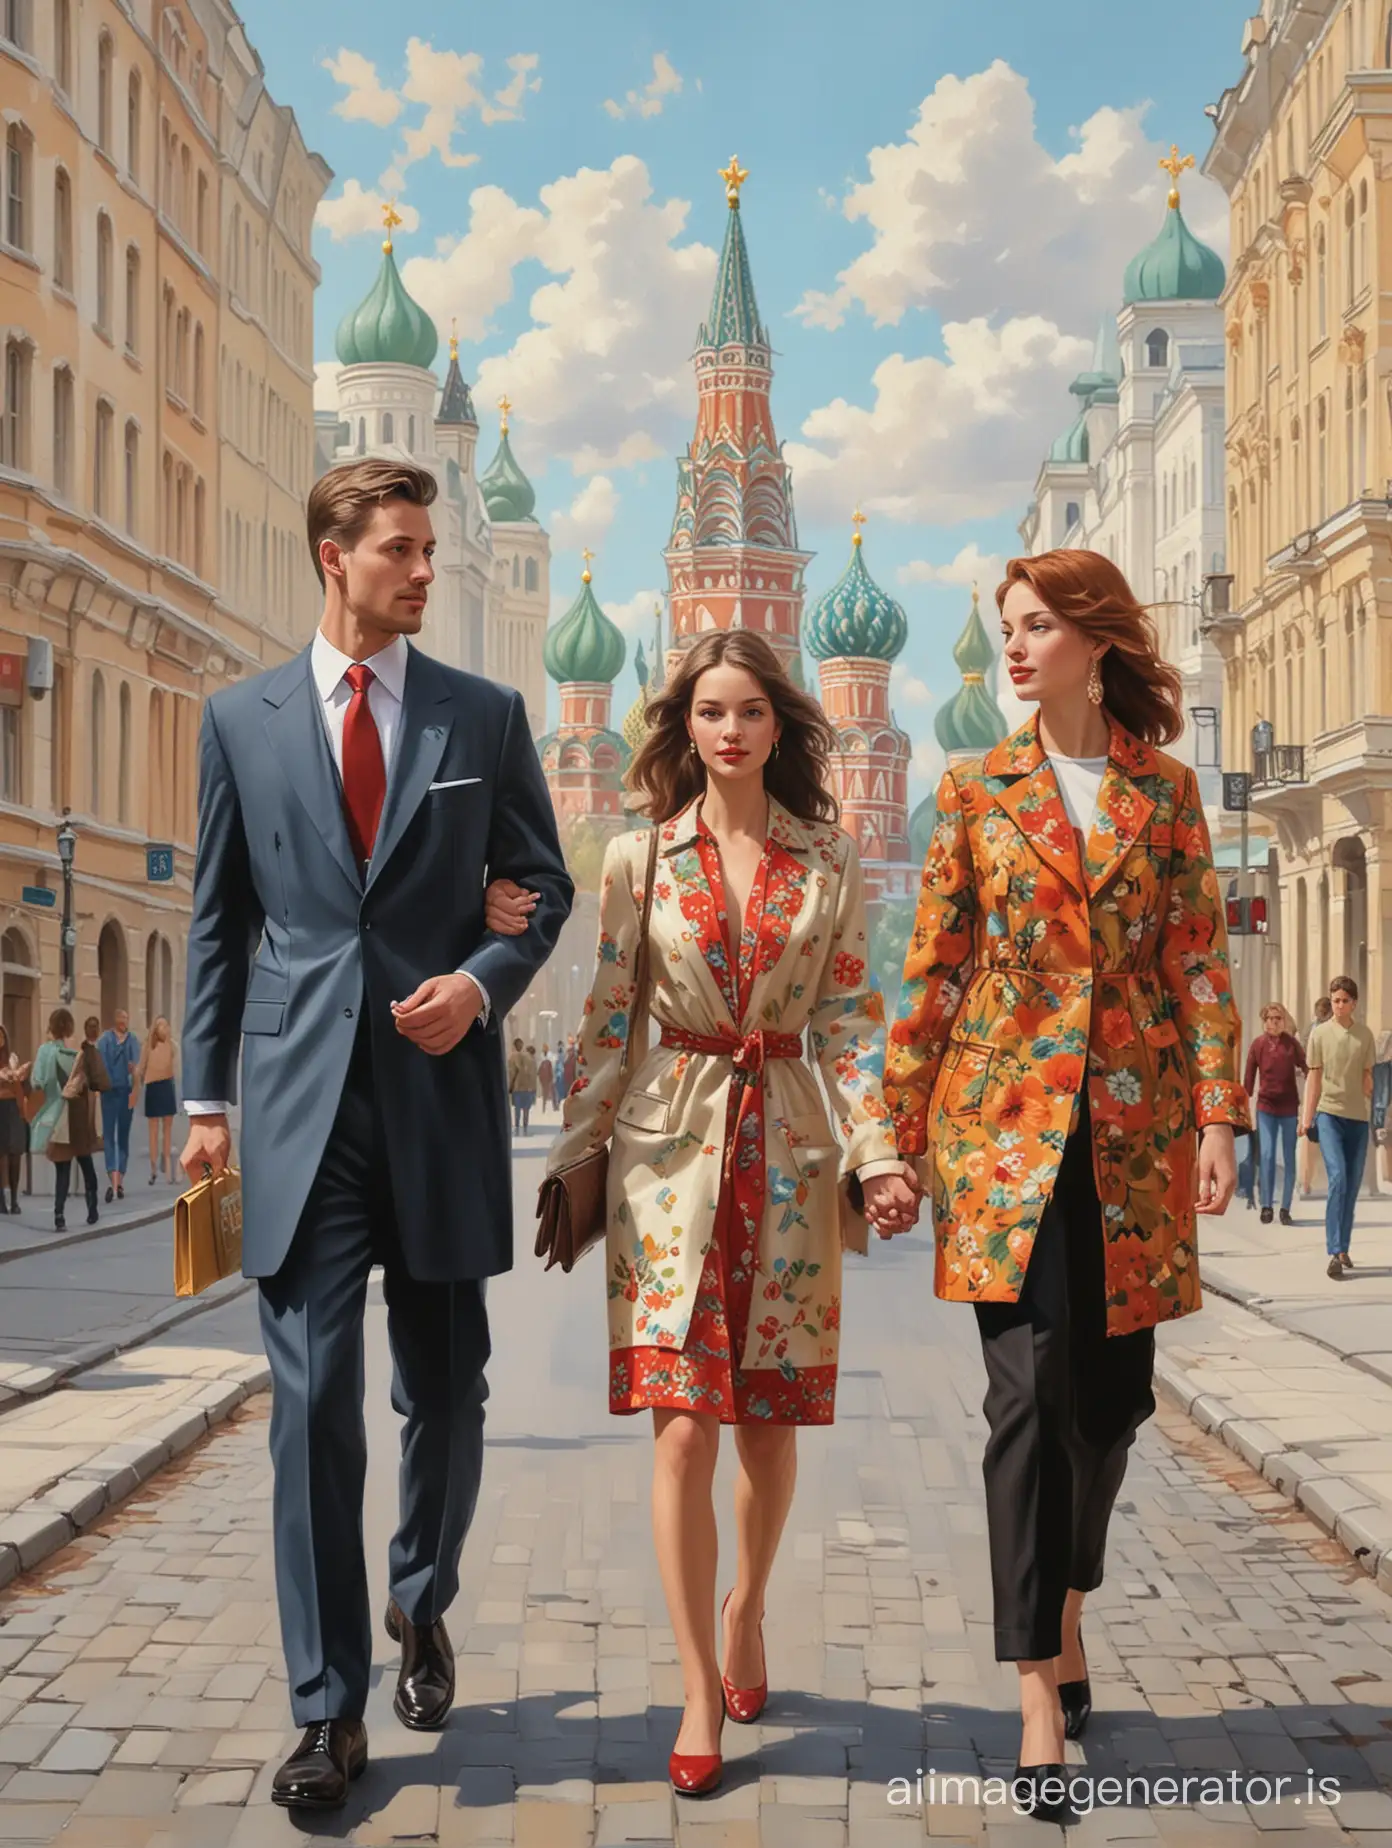 Two guys and two girls are walking down the street in Moscow in the style of Janet Hill.